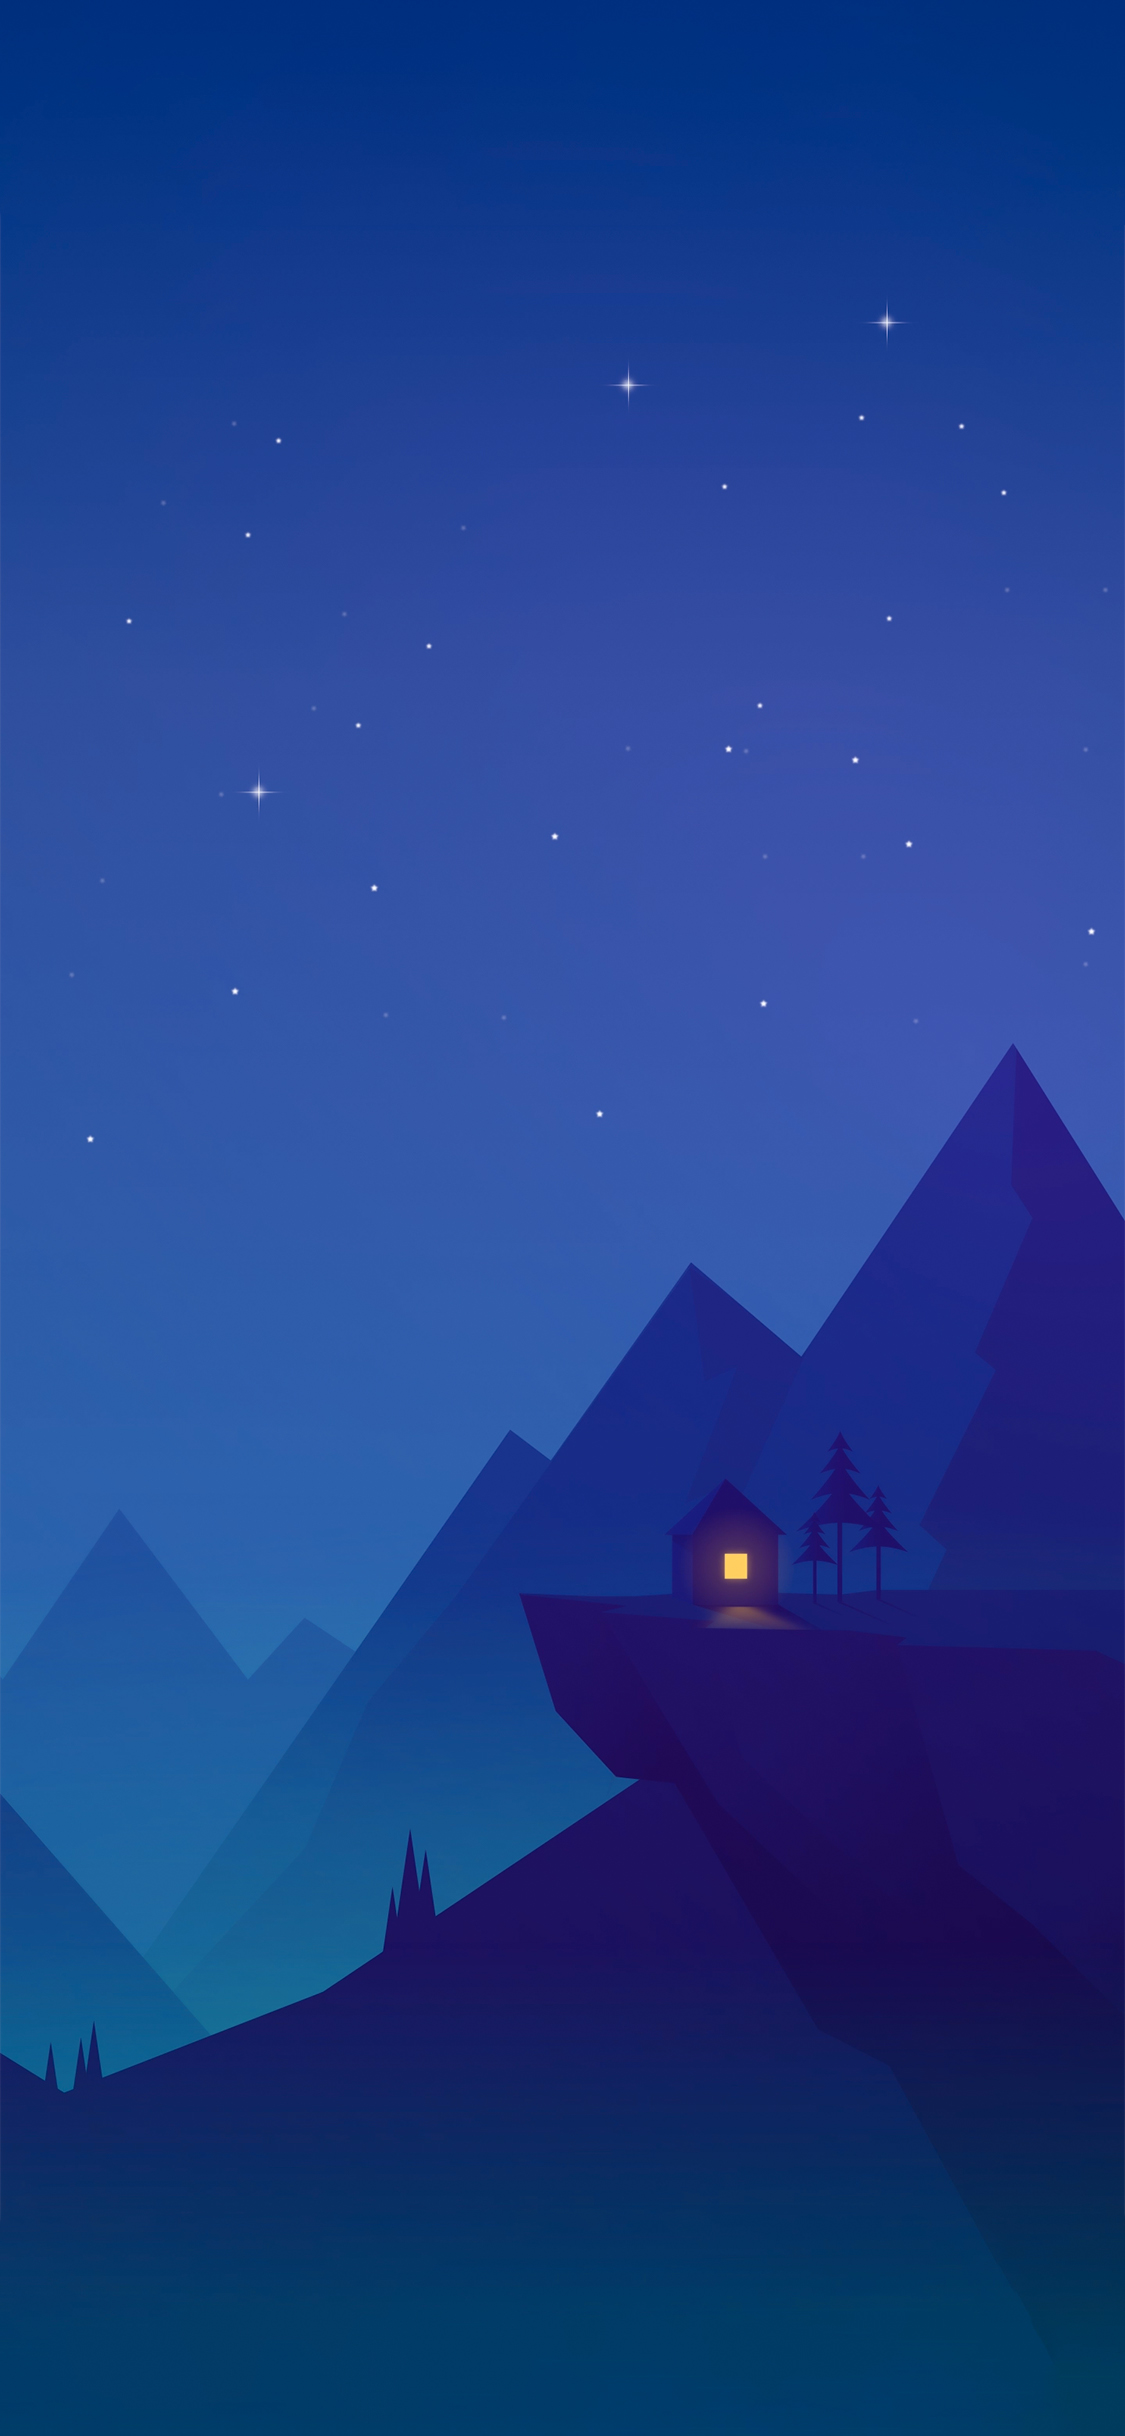 beautiful minimalist illustration of a little house in the valley at night. a small window shows a light on and makes the image cozy./ is a good image to use as wallpaper on your phone.